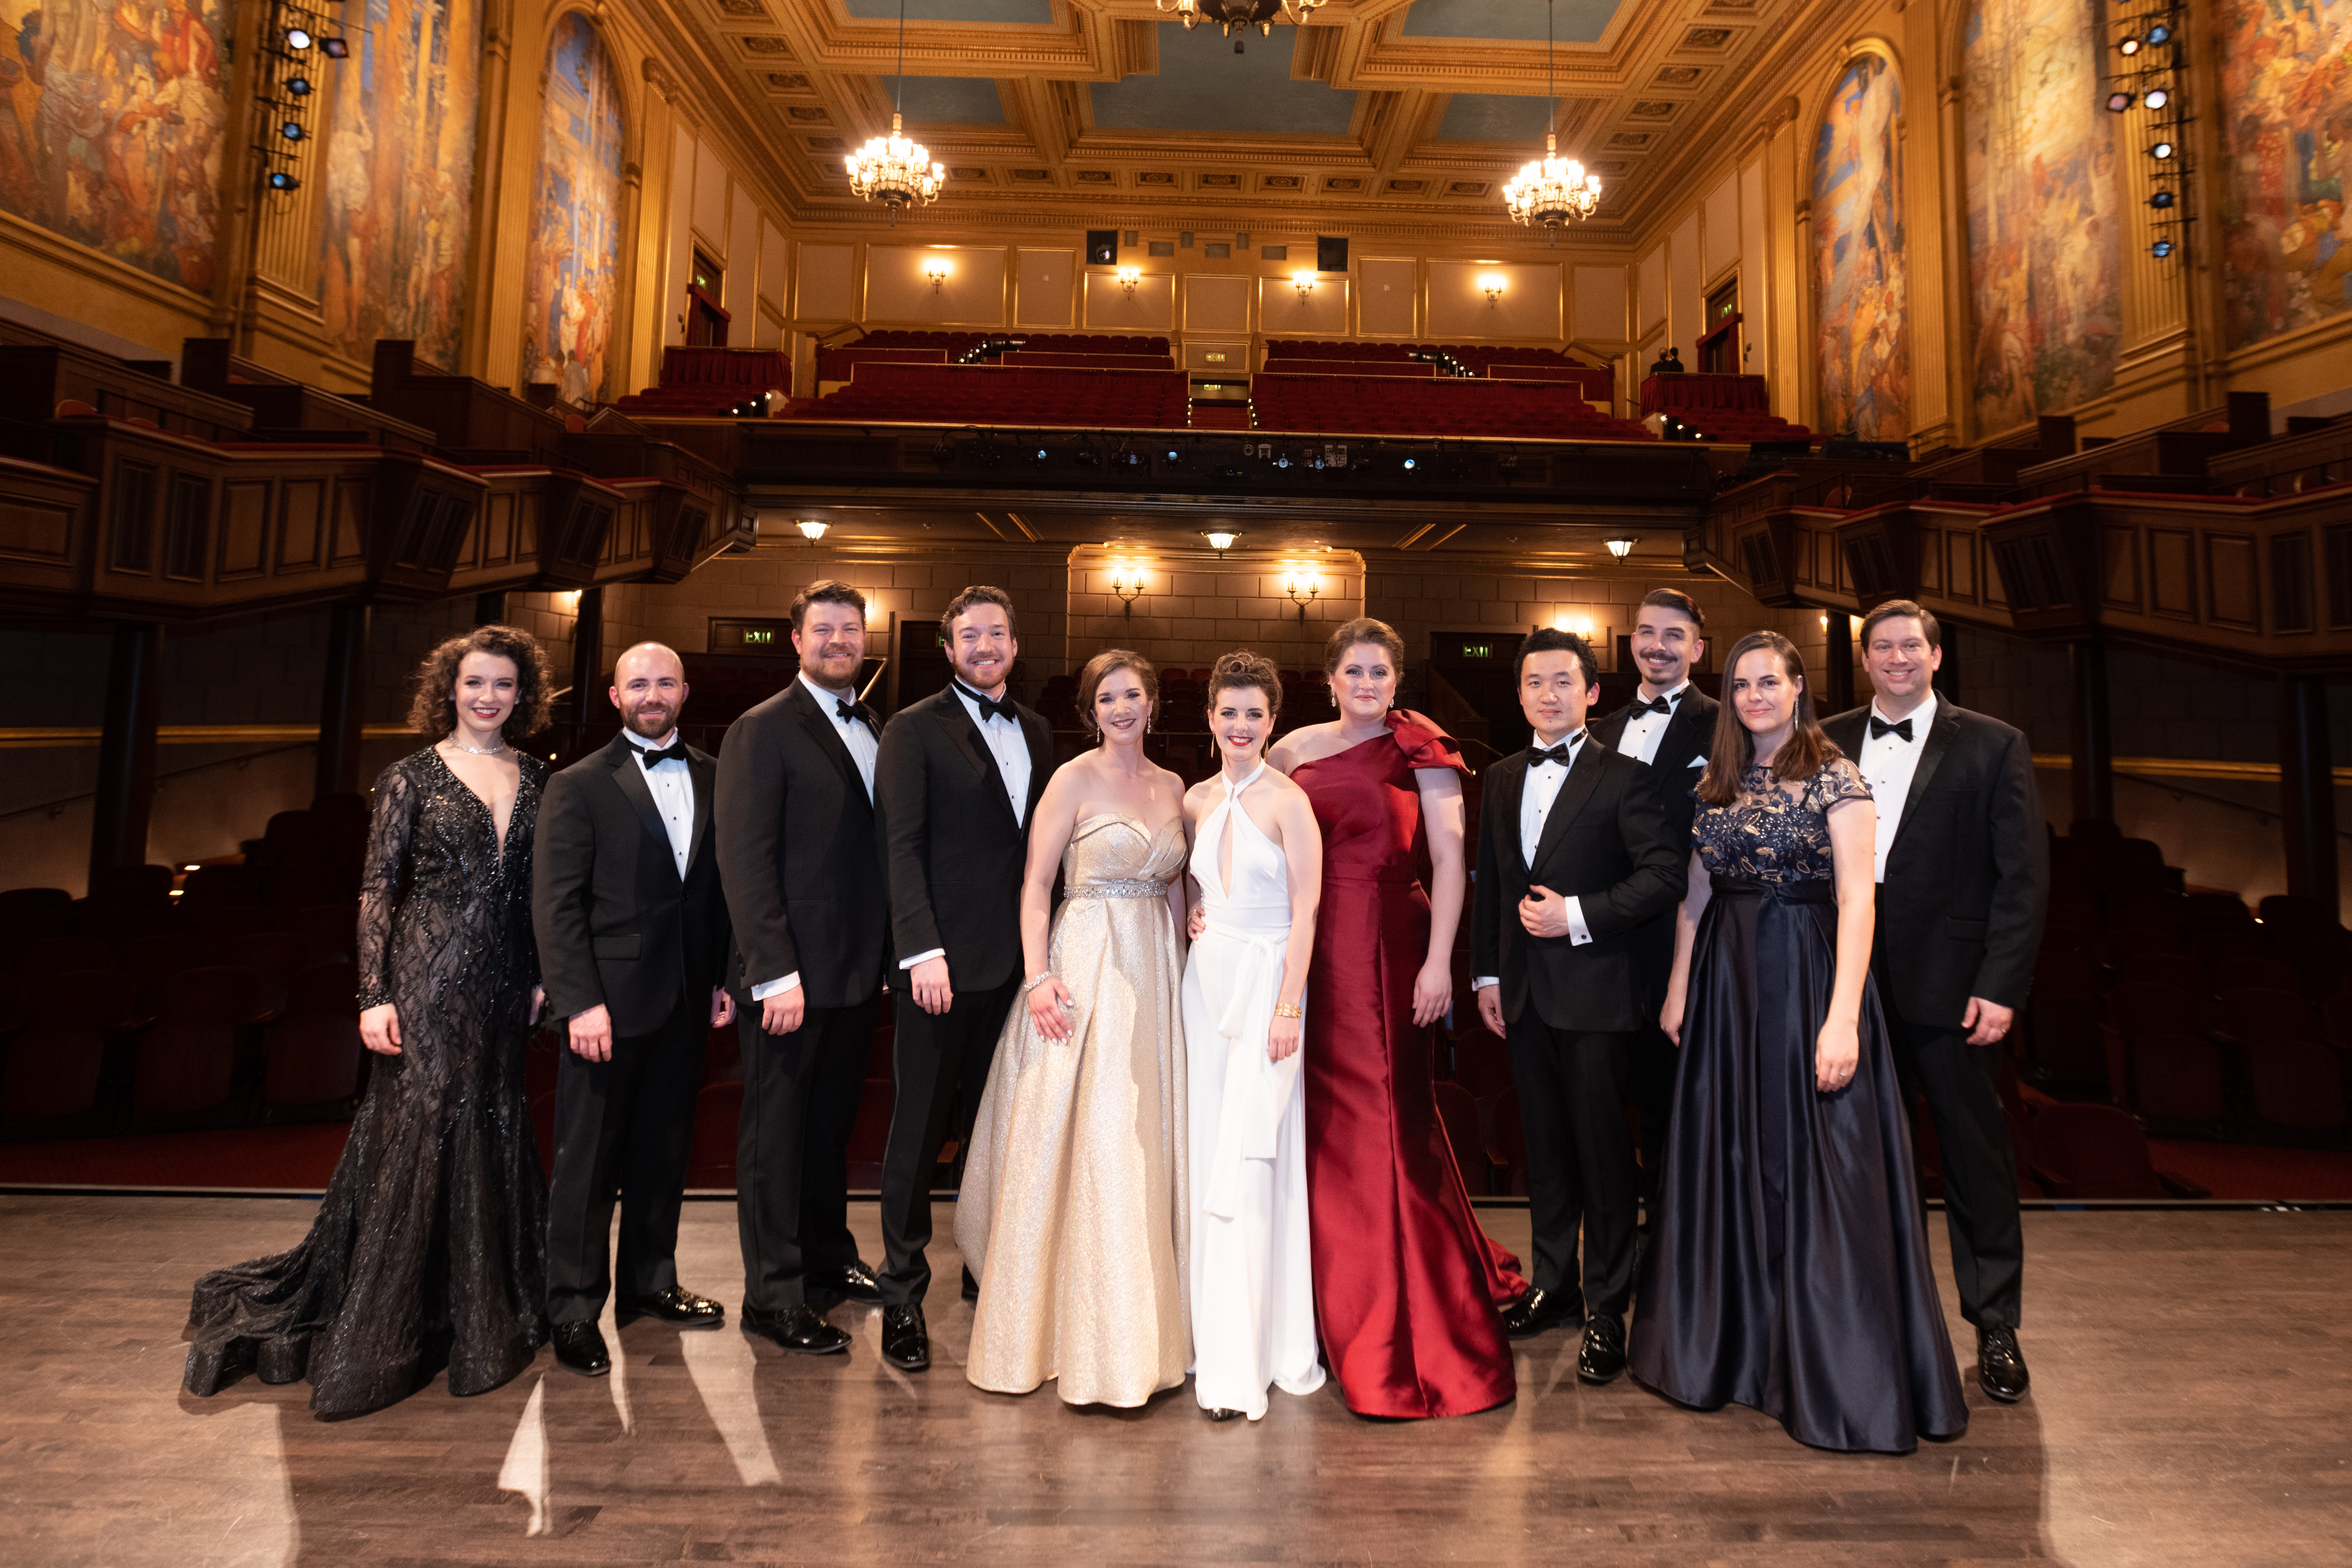 Merola Opera Program National Auditions with young professionals posing on stage